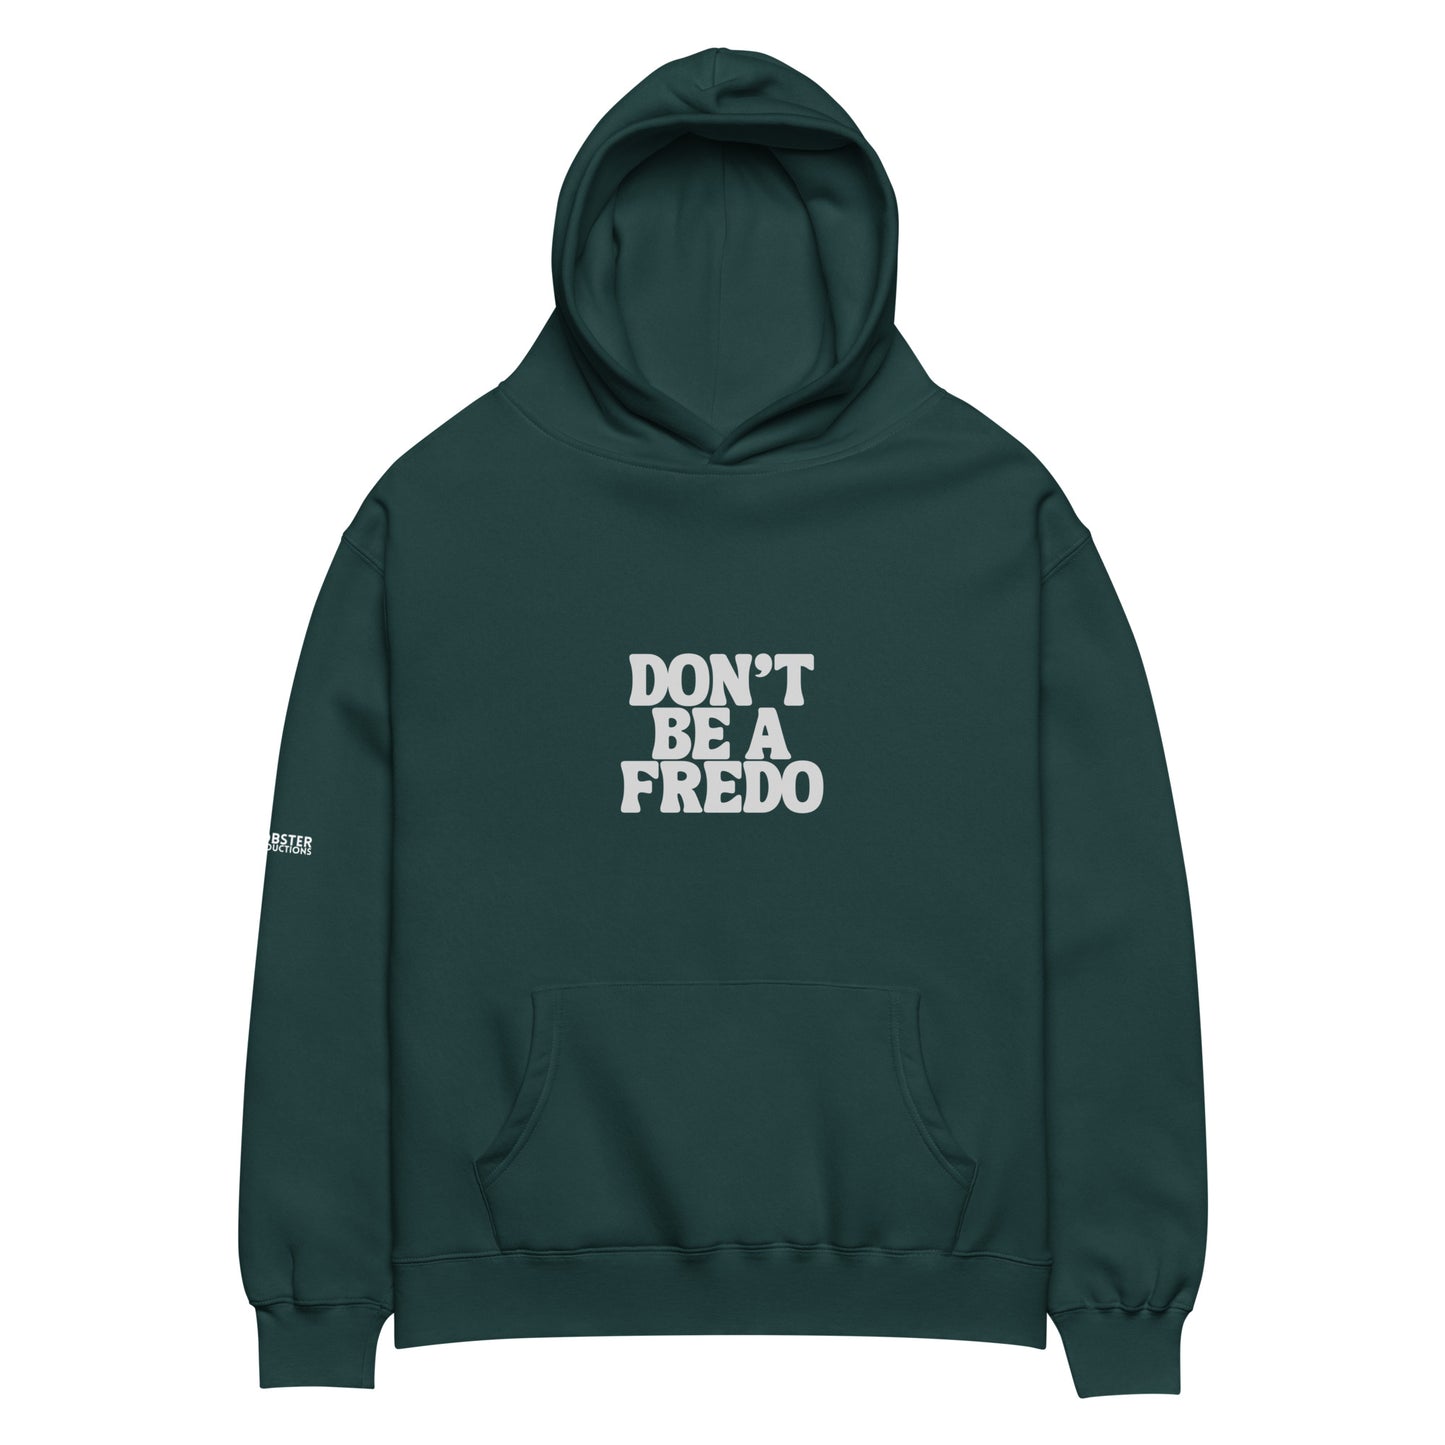 Don’t be a Fedo Unisex oversized hoodie